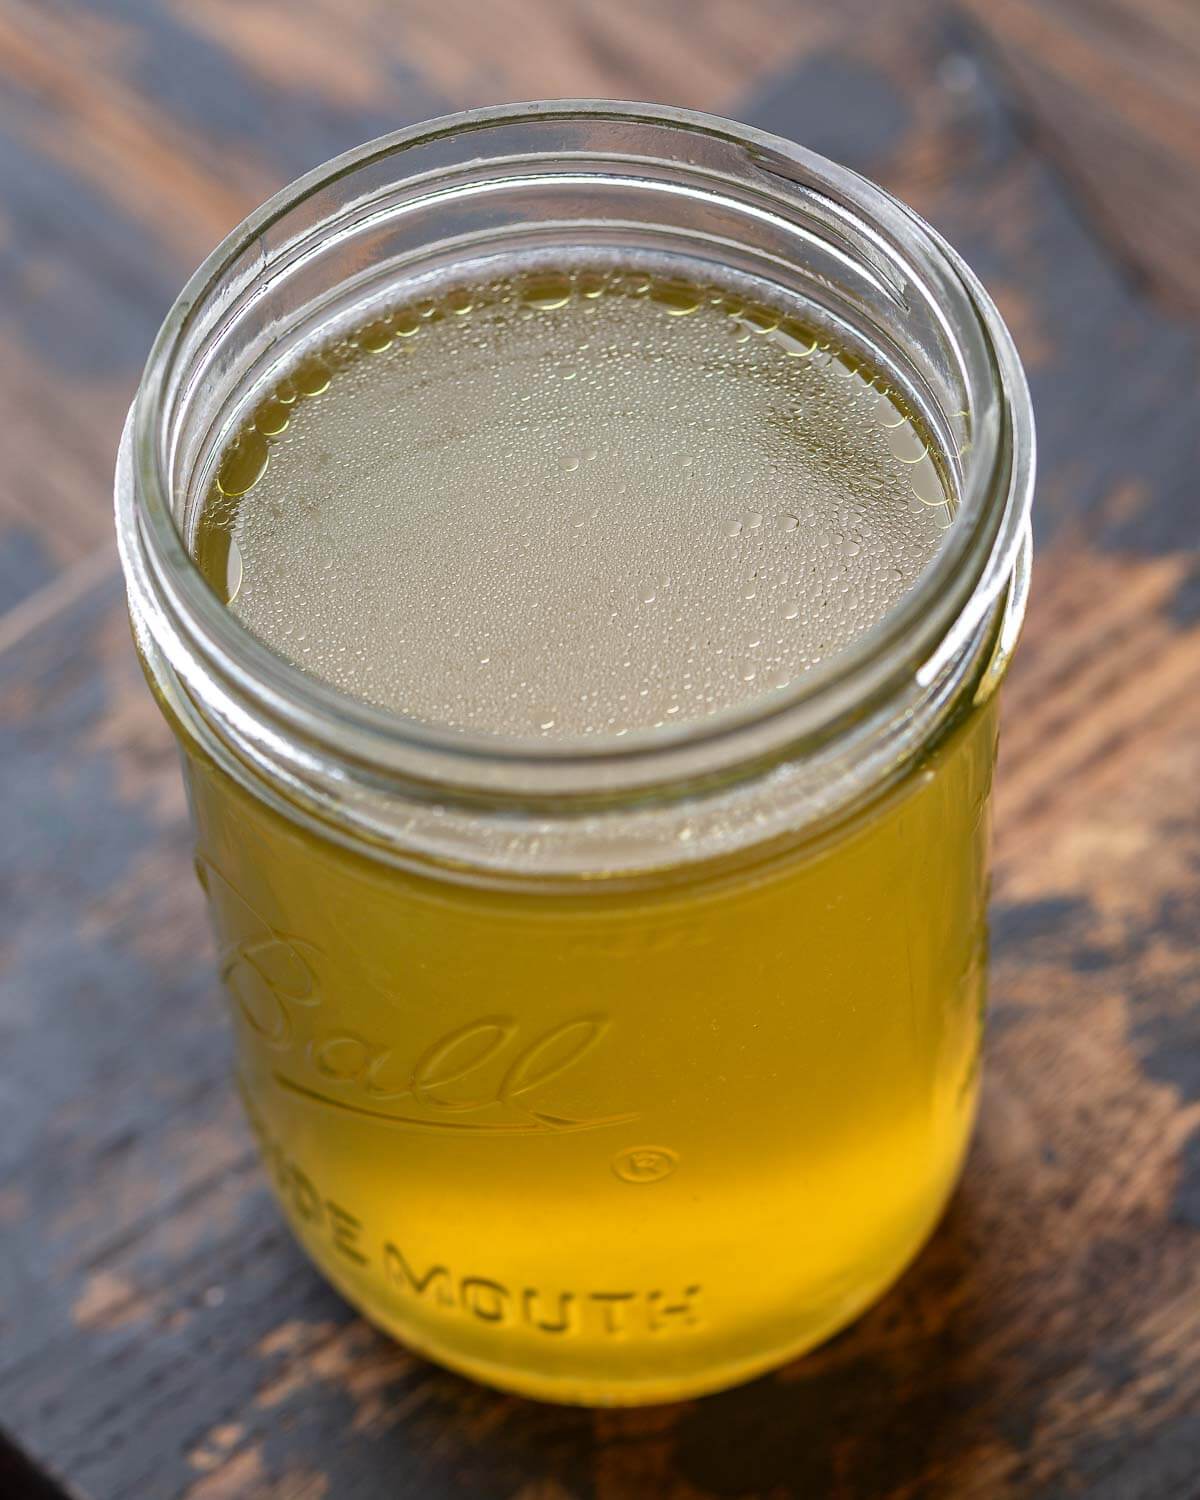 Mason jar filled with chicken stock.